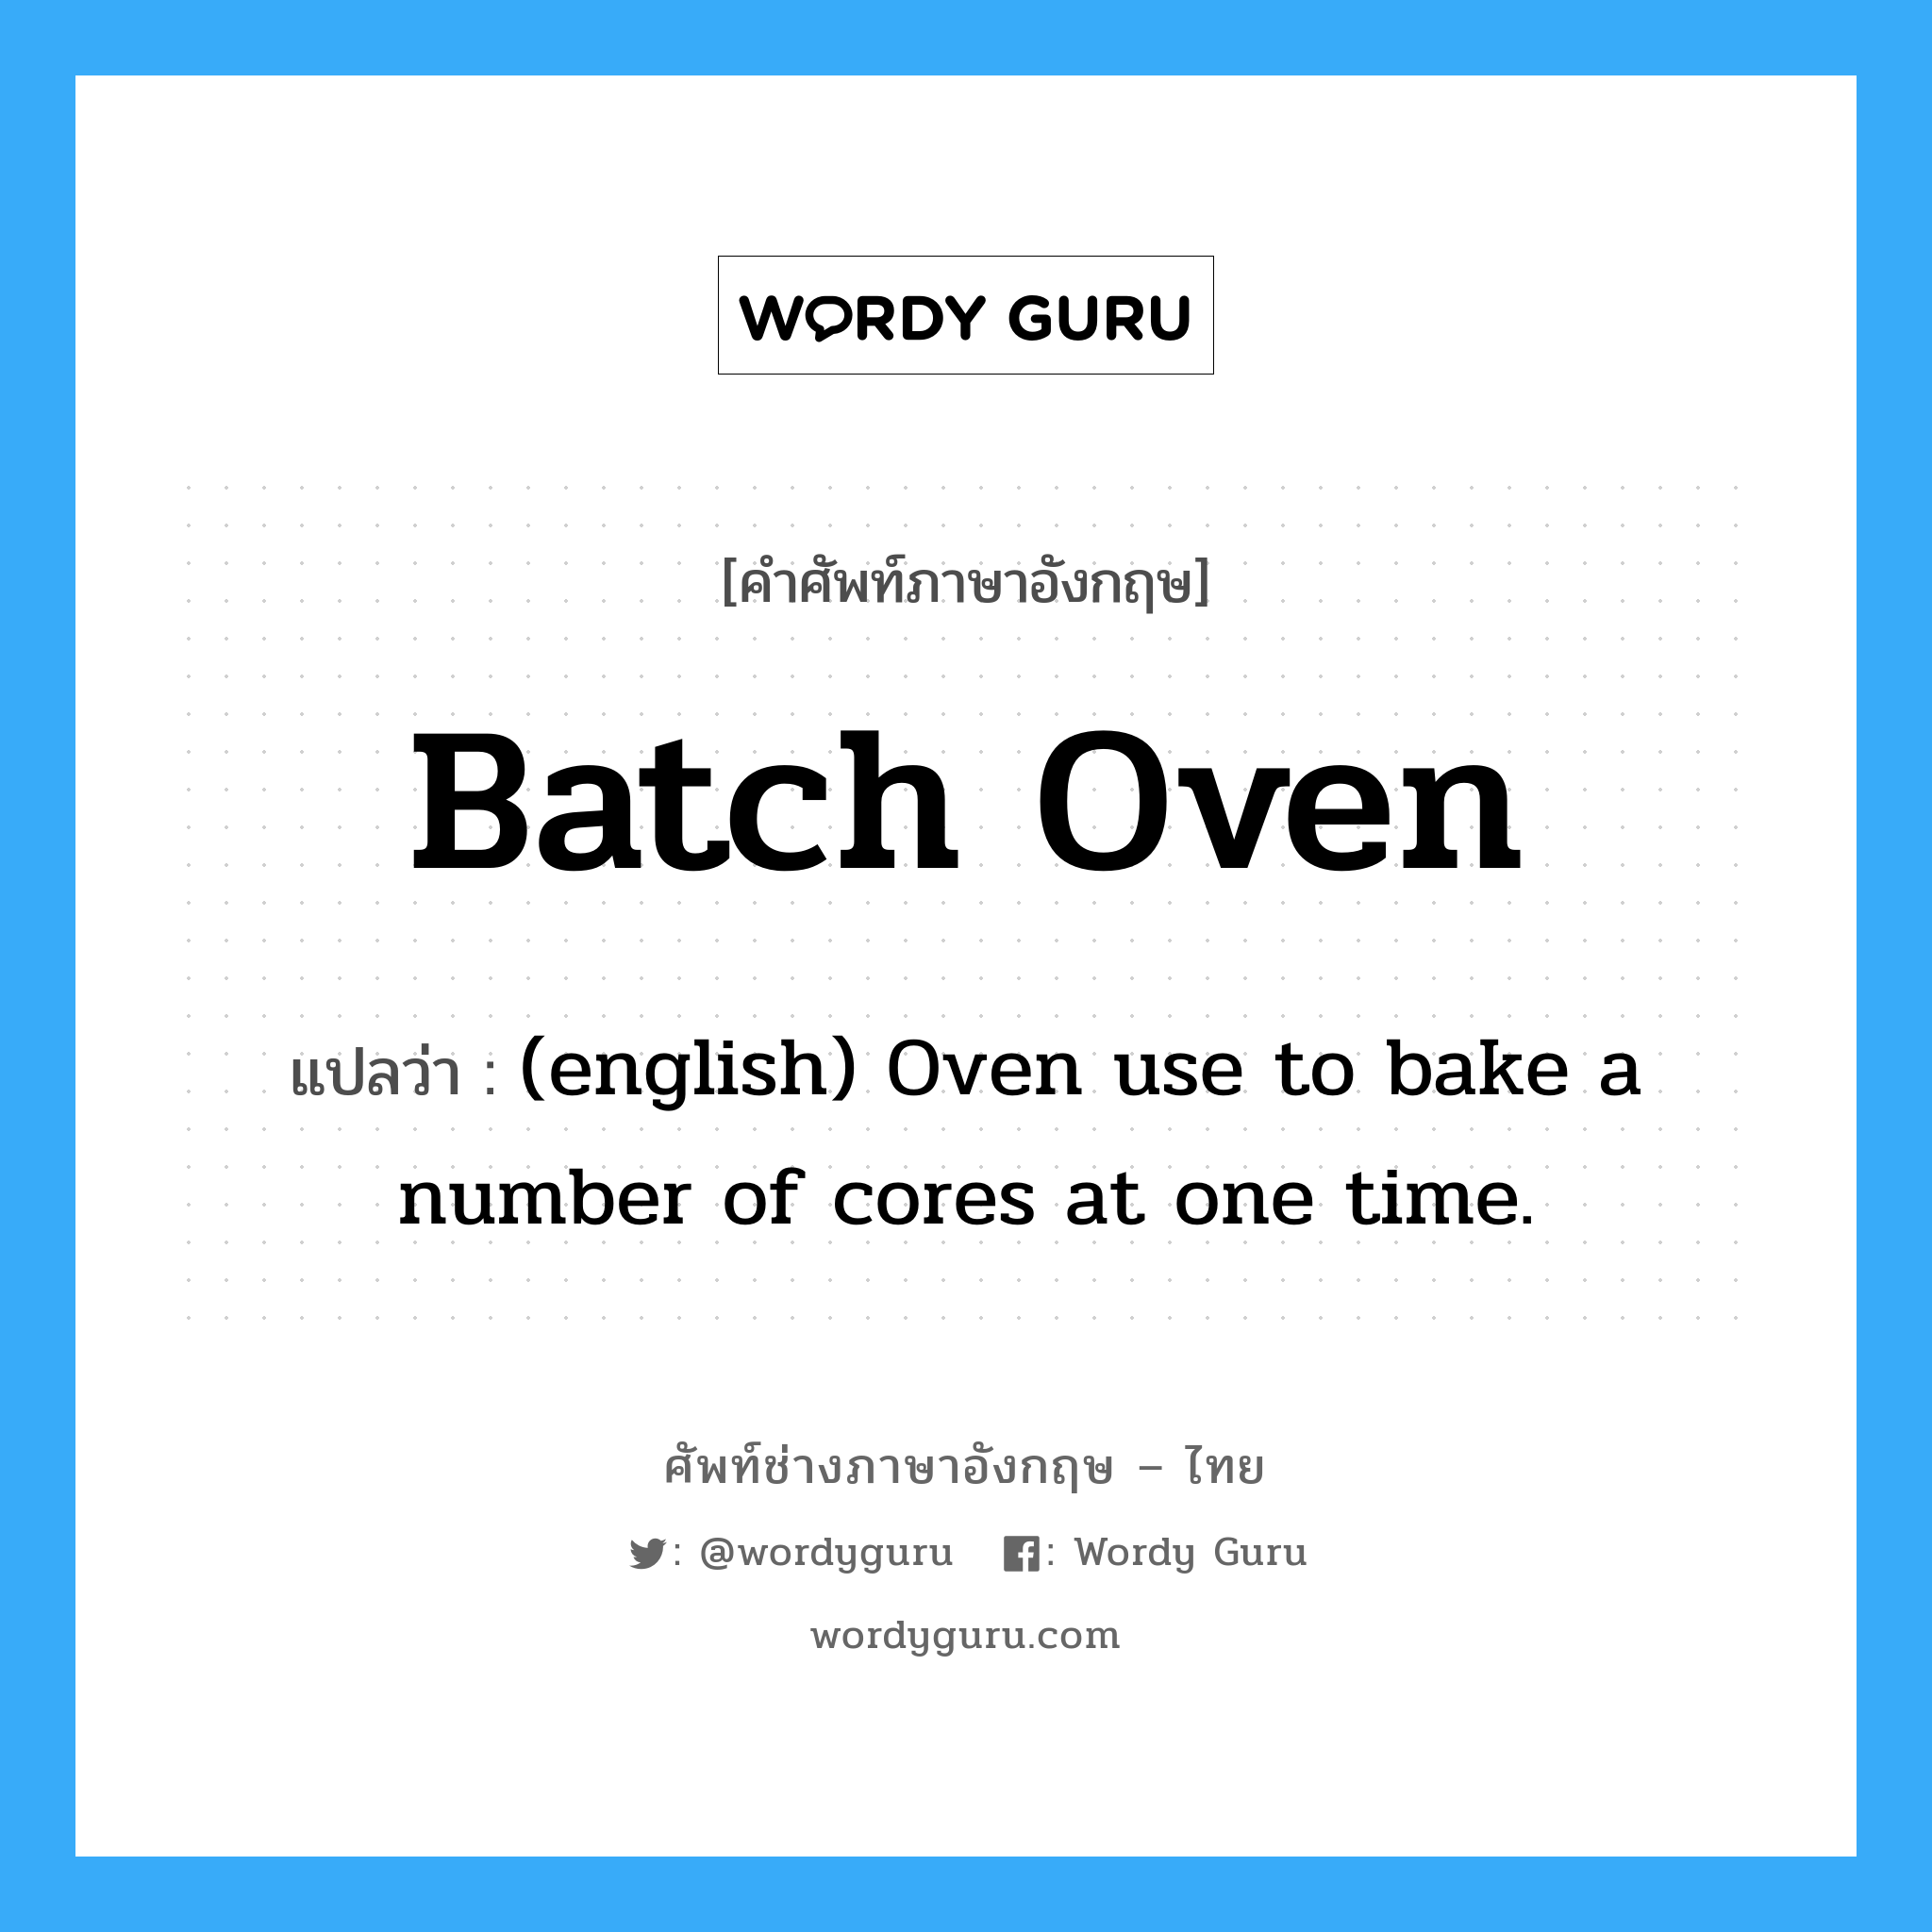 Batch Oven แปลว่า?, คำศัพท์ช่างภาษาอังกฤษ - ไทย Batch Oven คำศัพท์ภาษาอังกฤษ Batch Oven แปลว่า (english) Oven use to bake a number of cores at one time.